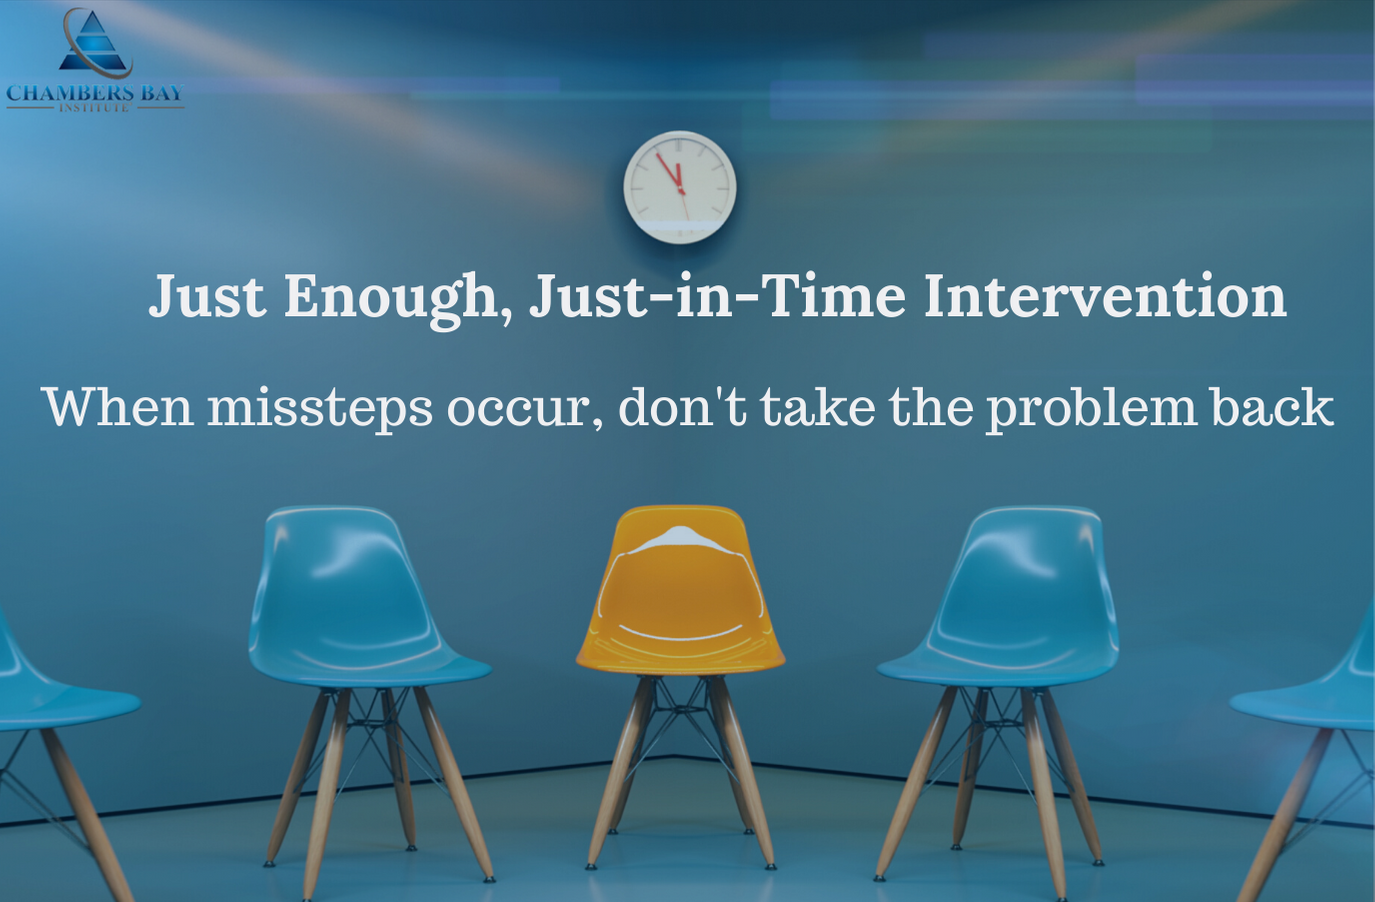 Just Enough, Just-in-Time Intervention When missteps occur, don't take the problem back